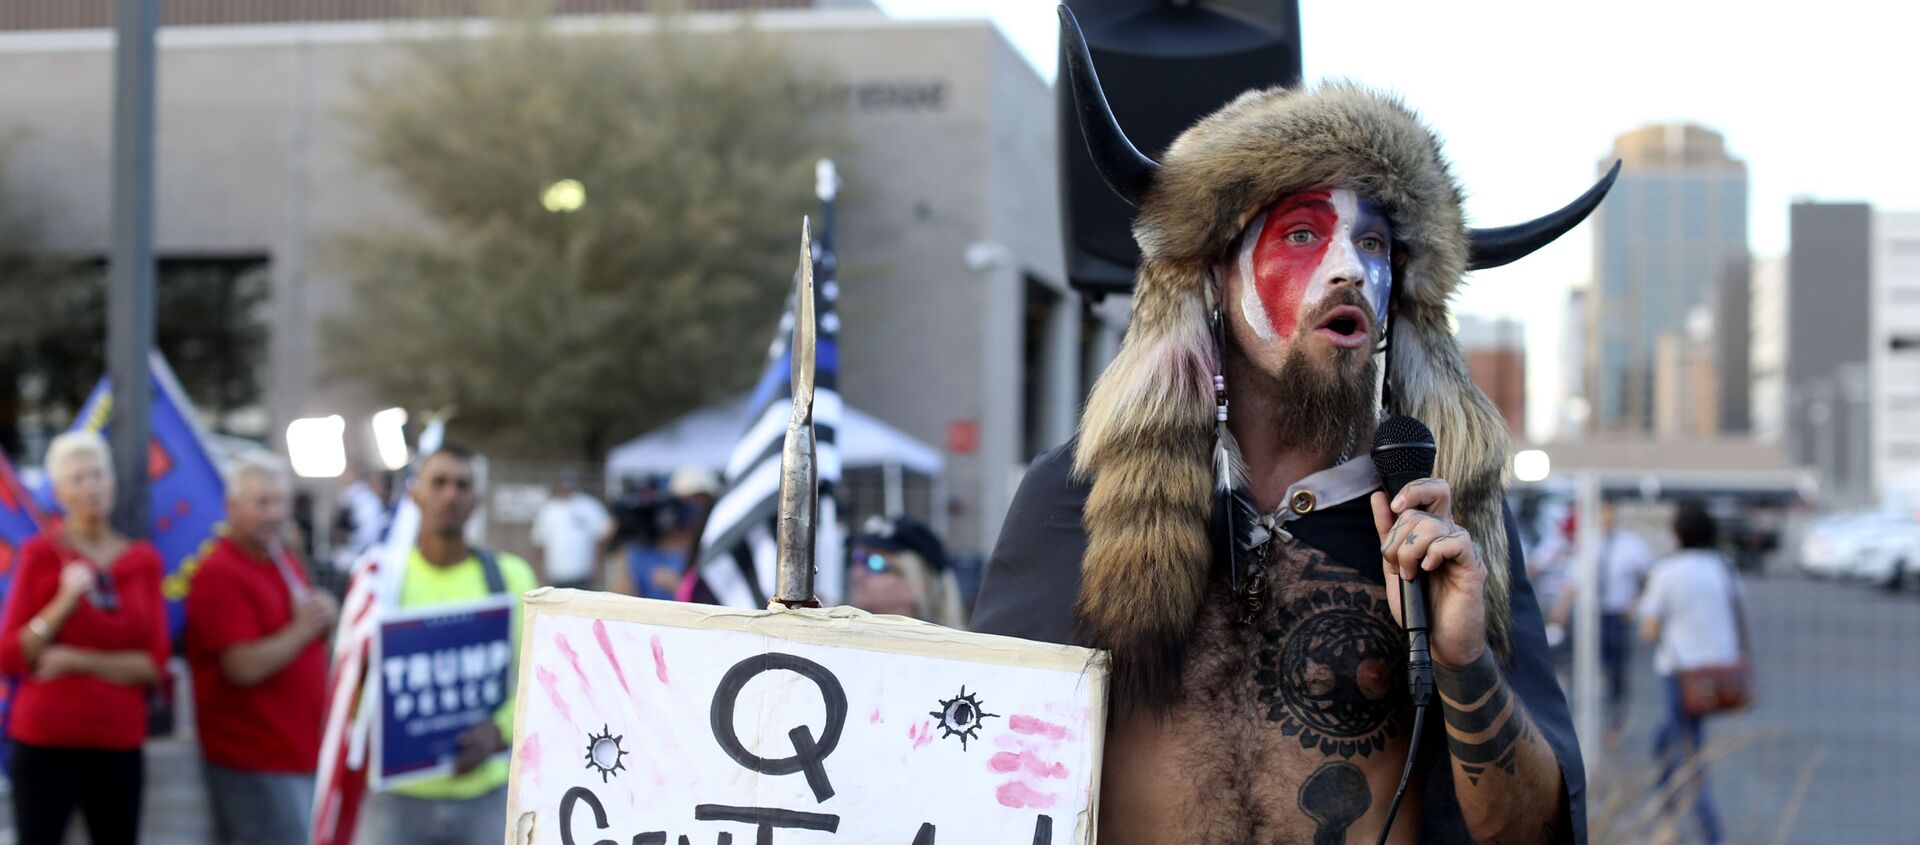 A Qanon believer speaks to a crowd of President Donald Trump supporters outside of the Maricopa County Recorder's Office where votes in the general election are being counted, in Phoenix, Thursday, Nov. 5, 2020. - Sputnik International, 1920, 09.01.2021